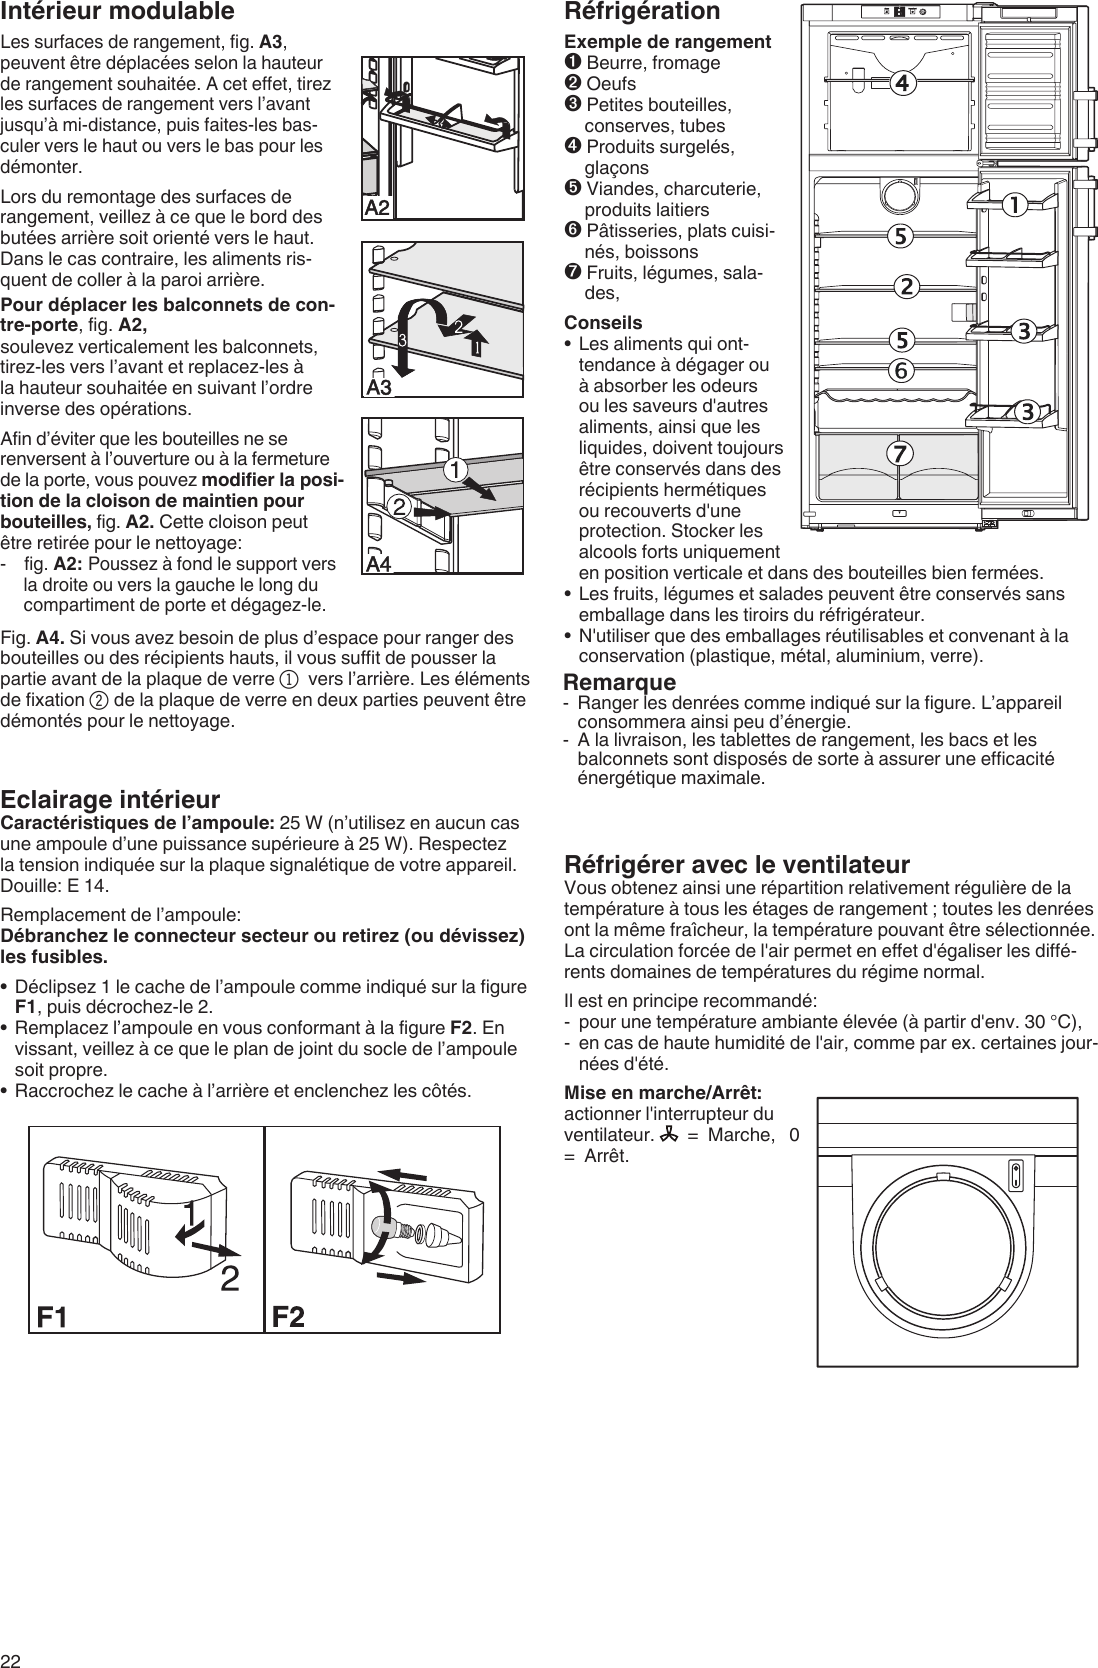 Page 4 of 7 - Liebherr Liebherr-Combined-Refrigerator-Freezer-Nofrost-7081-885-01-Users-Manual-  Liebherr-combined-refrigerator-freezer-nofrost-7081-885-01-users-manual